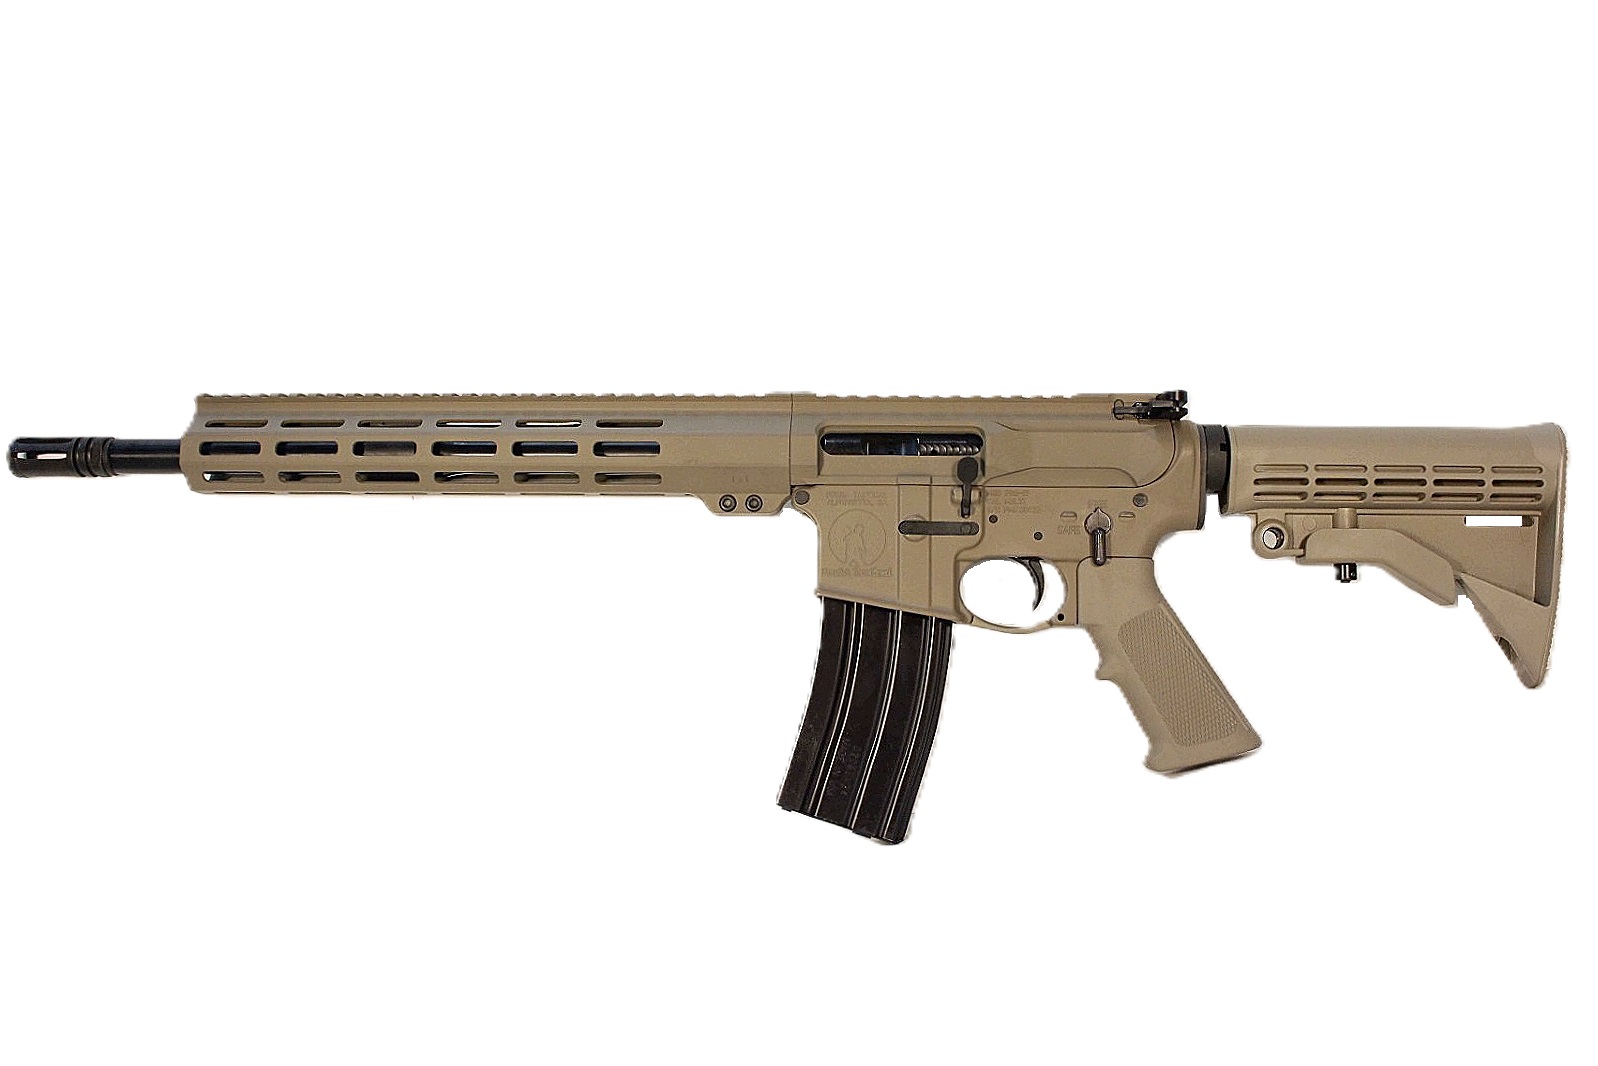 P2A PATRIOT LEFT HAND 14.5" 5.56 NATO 1/7 Carbine Length Melonite M-LOK Rifle - Pinned & Welded - FDE